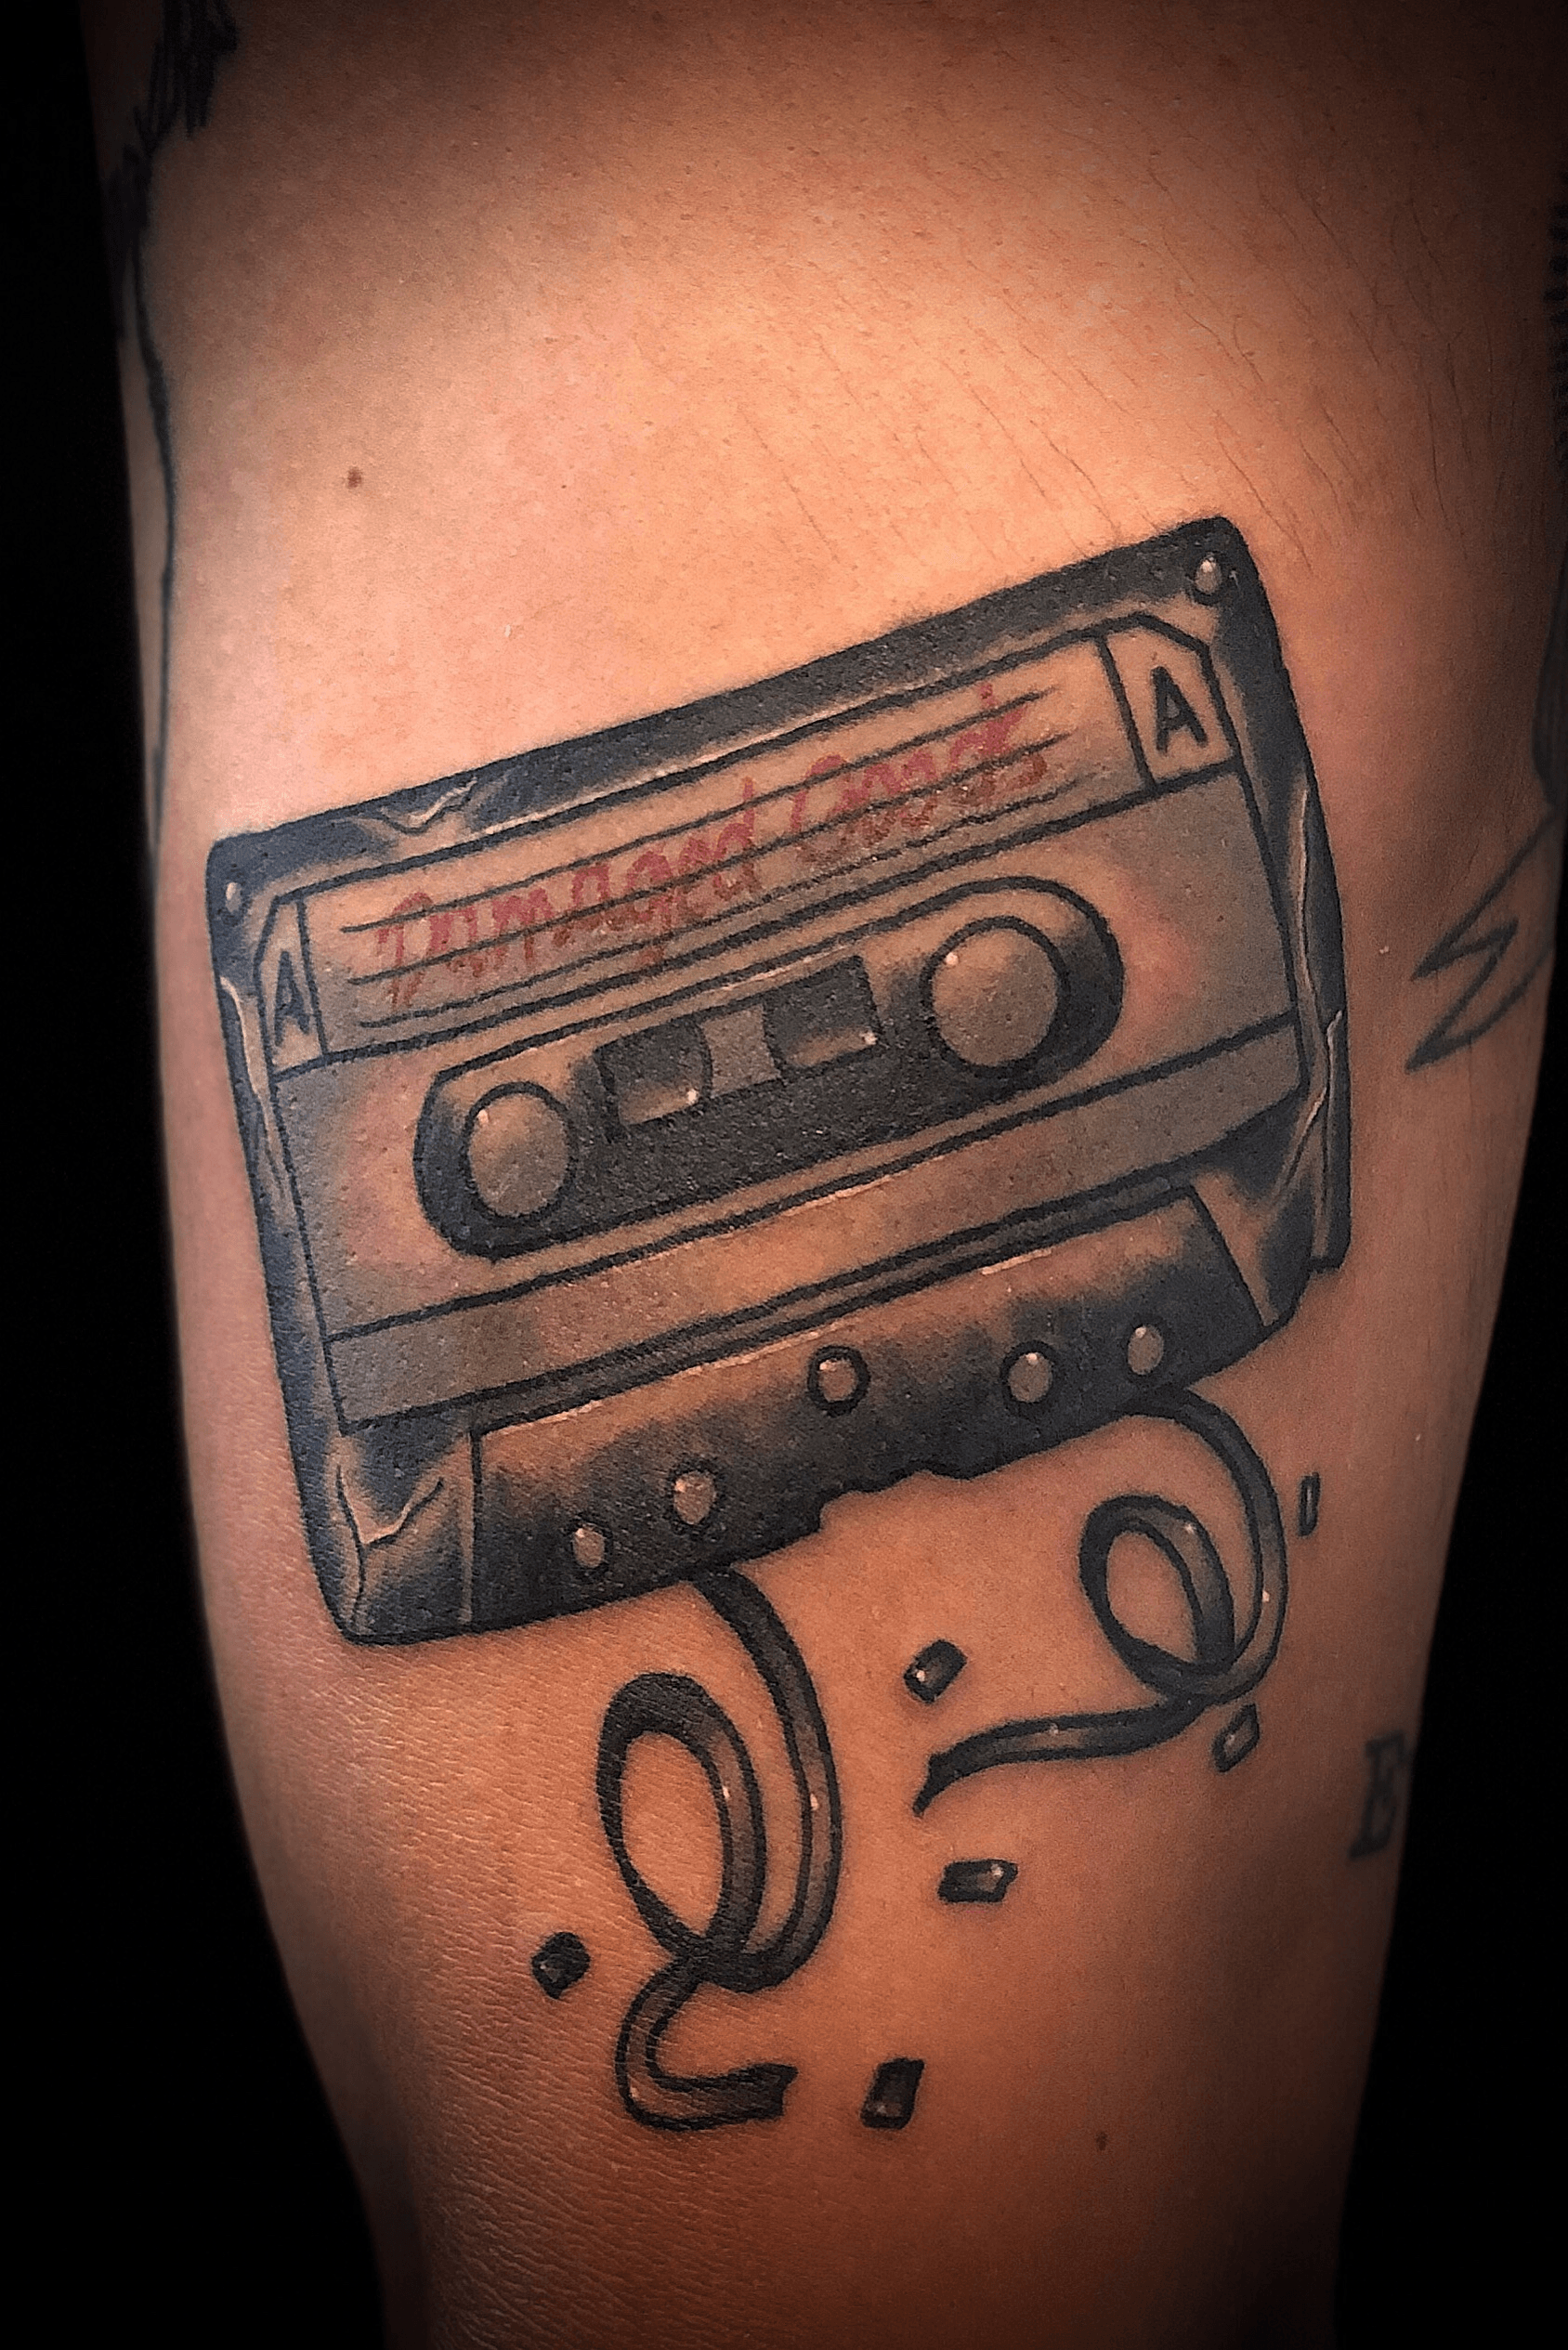 Buy Cassette Tape Tattoo  Tape Temporary Tattoo  Nineties Online in India   Etsy